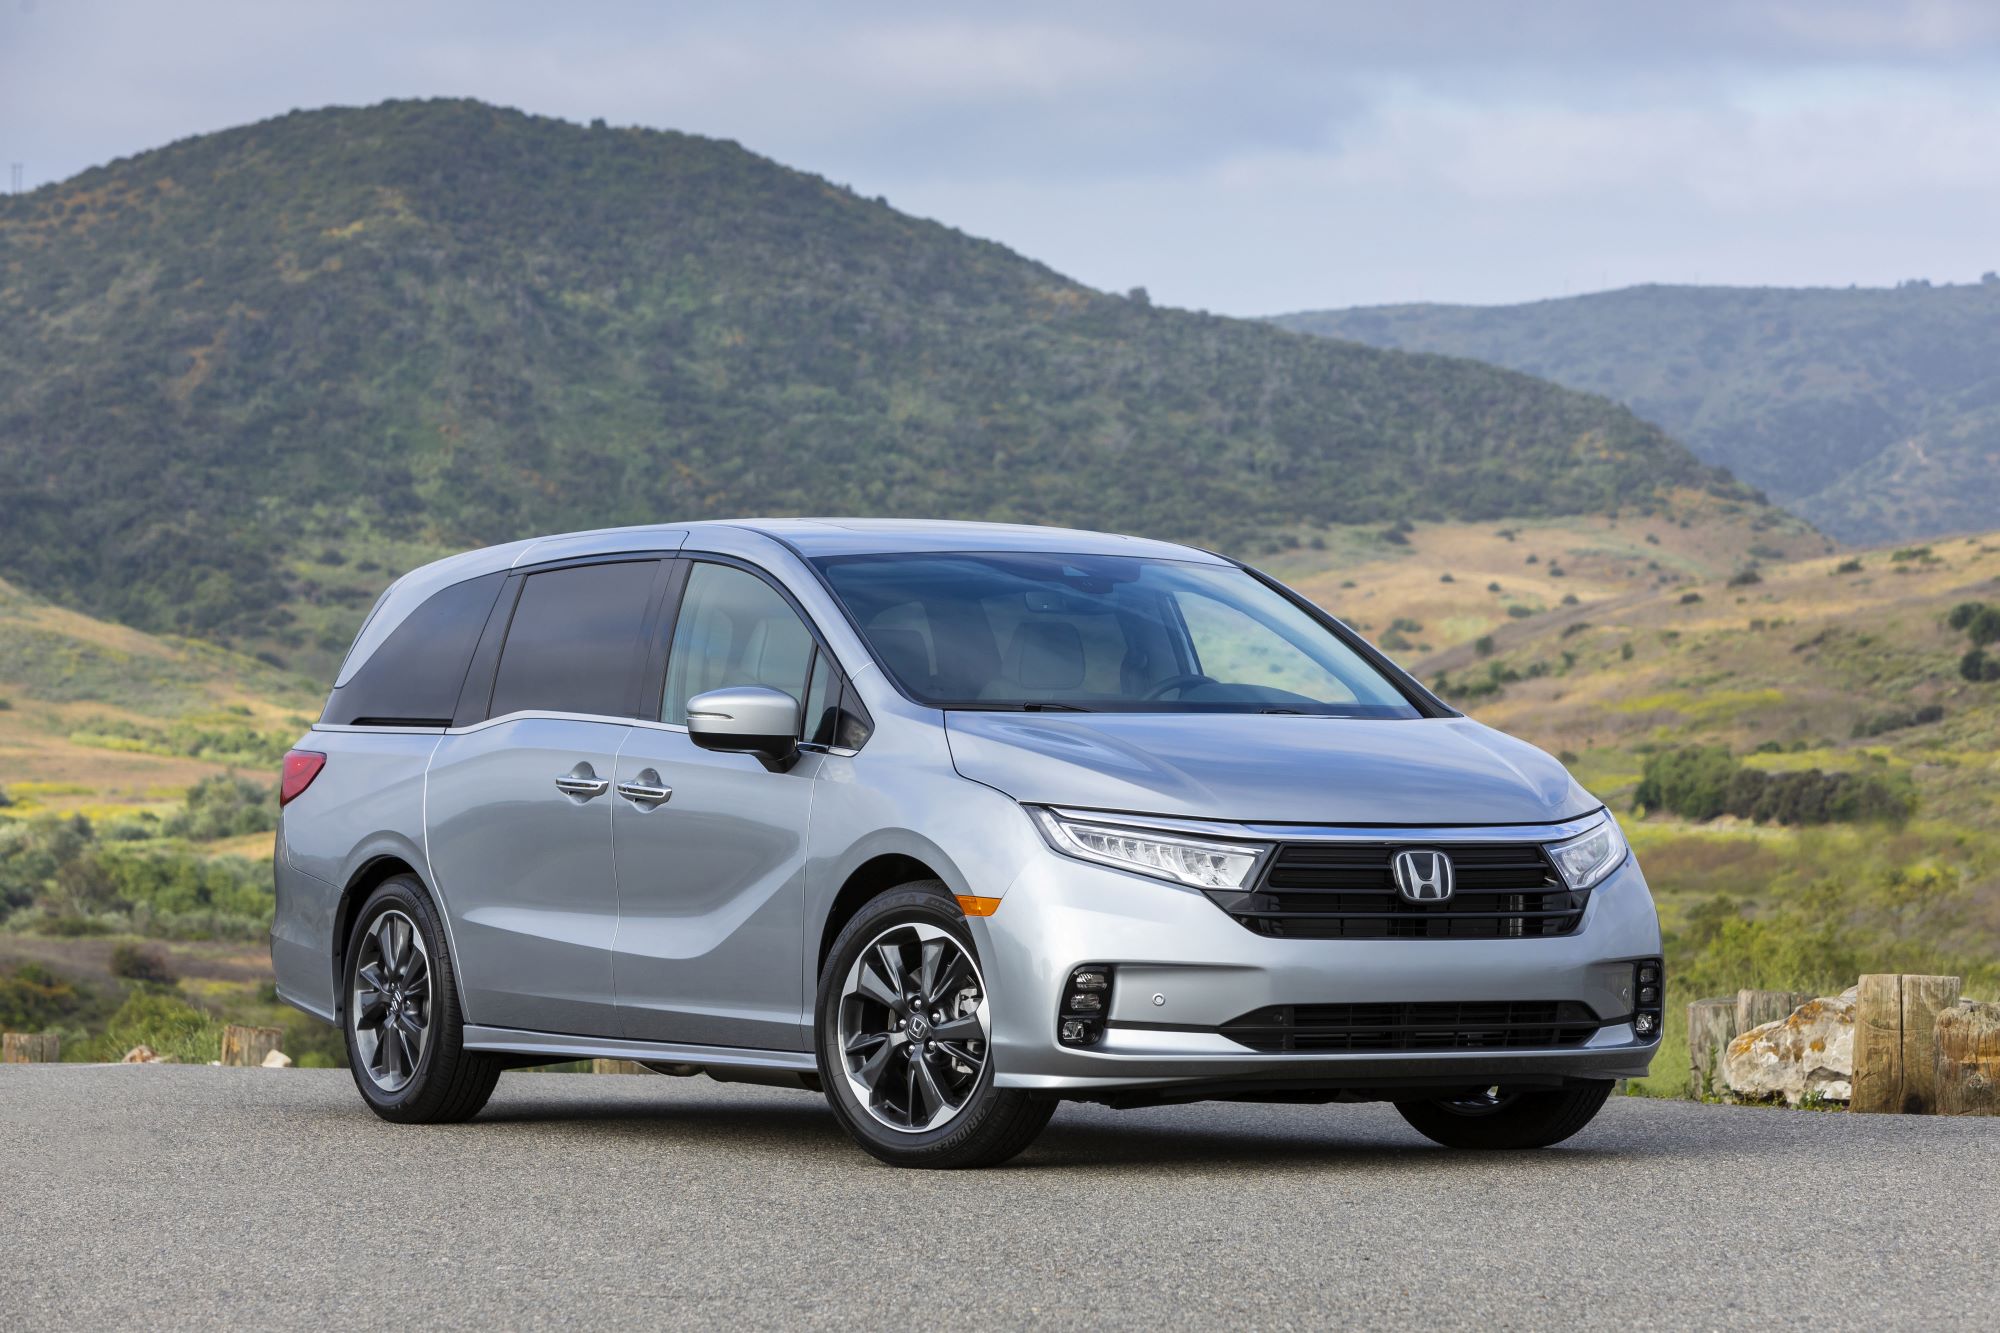 A silver 2022 Honda Odyssey in front of mountains on a paved area.